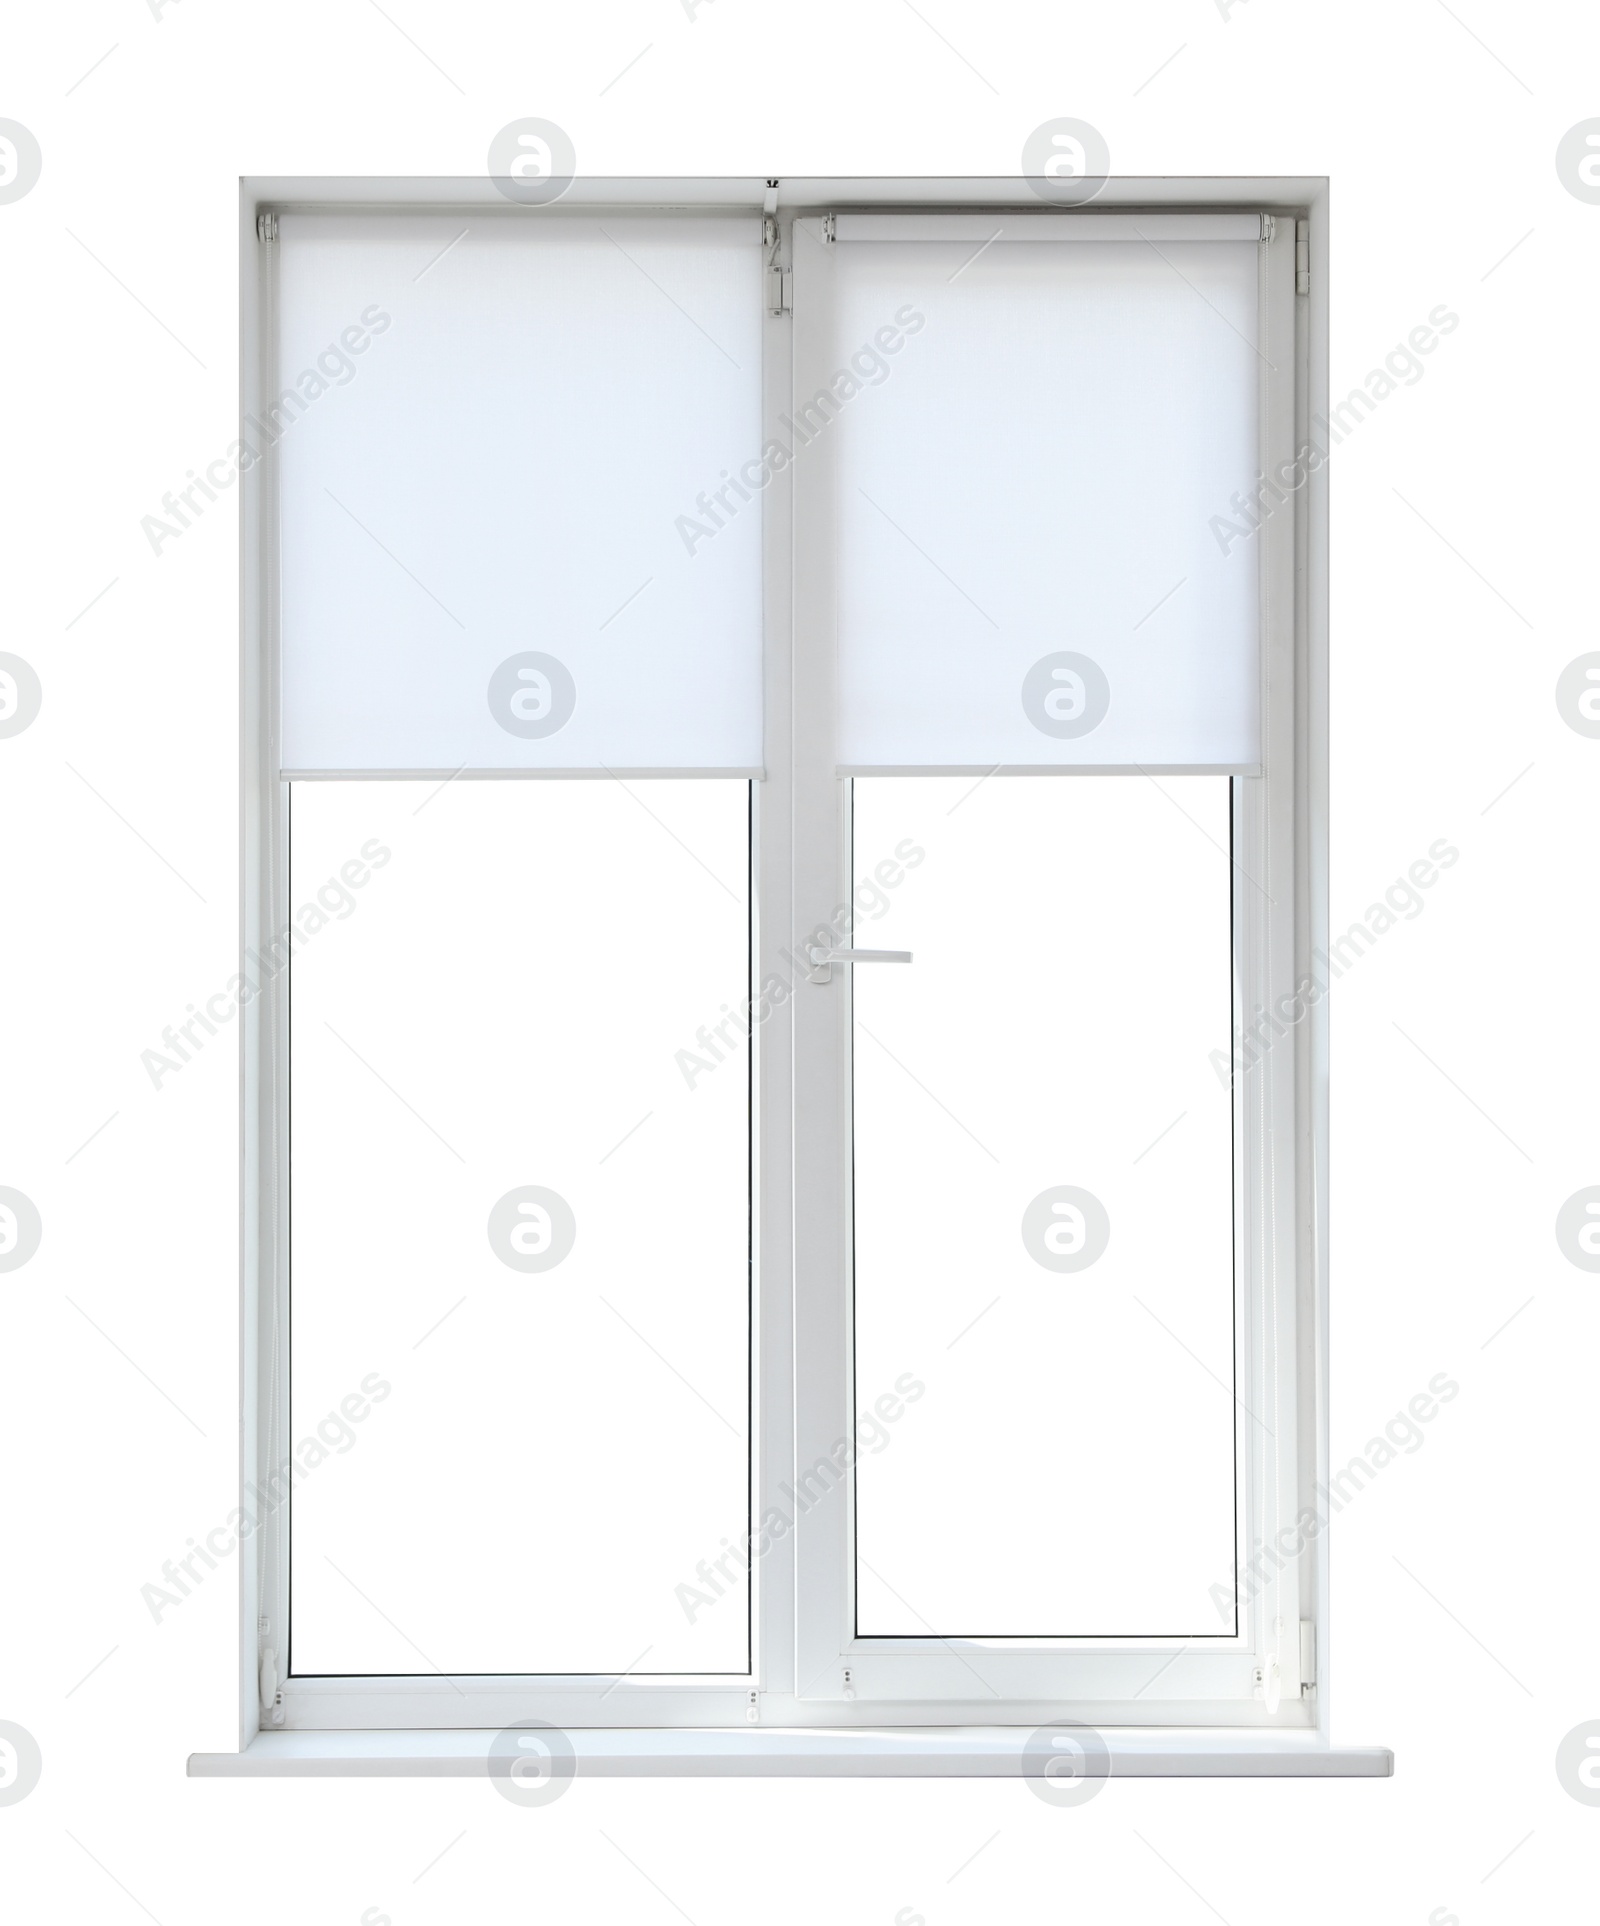 Image of Modern closed plastic window on white background